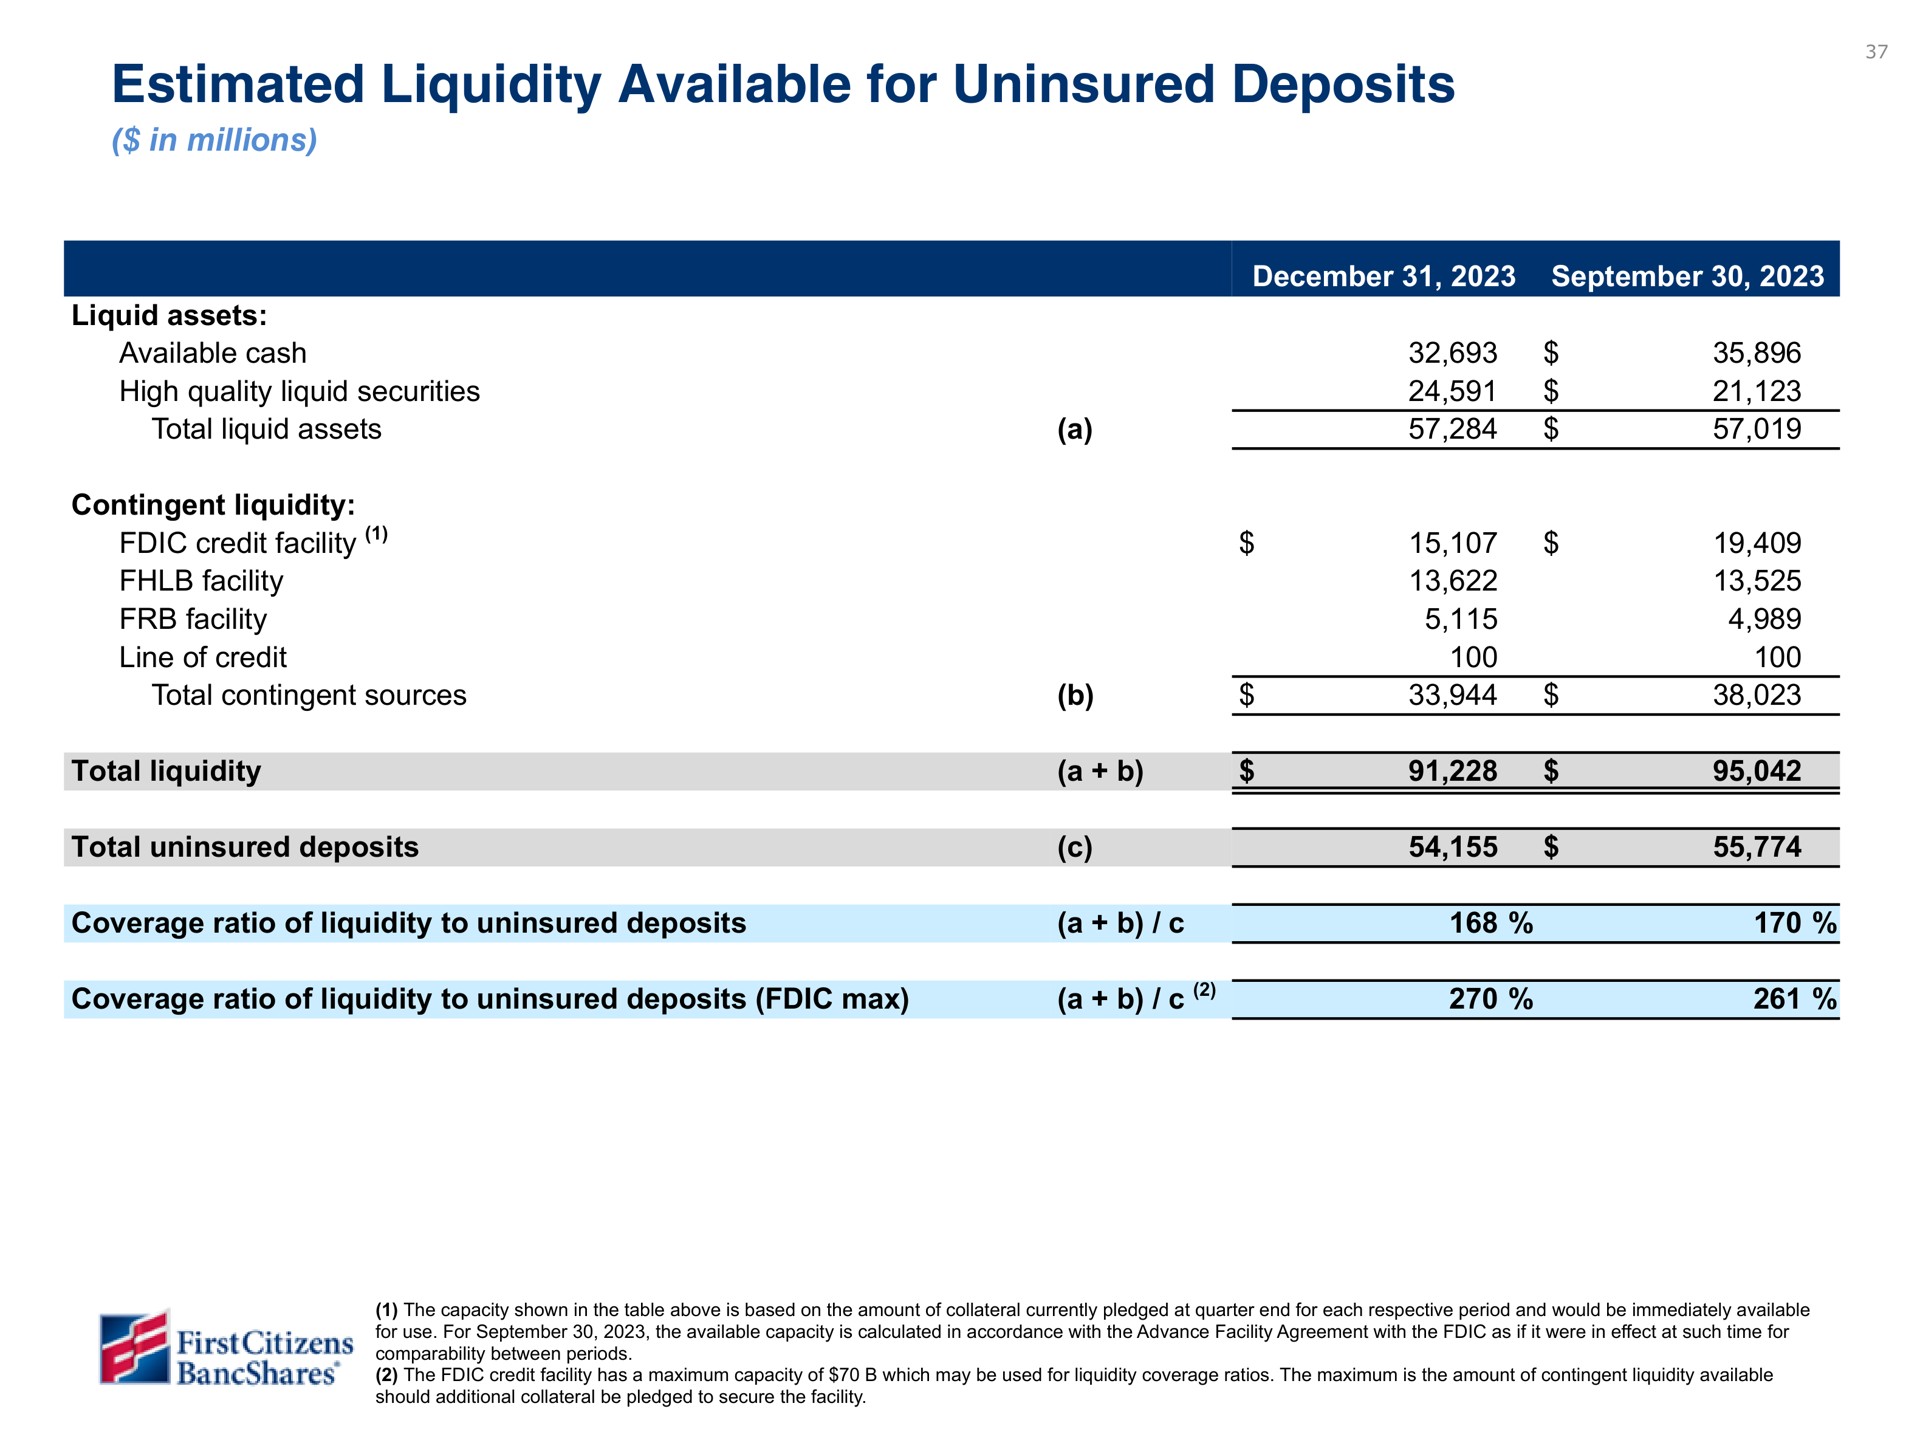 estimated liquidity available for uninsured deposits total deposits immediately available cash unpledged securities line of credit less insured and or deposits total deposits uninsured estimated liquidity available for uninsured deposits fed discount window program estimated liquidity available for uninsured deposits coverage ratio of liquidity available to uninsured and deposits facility | First Citizens BancShares